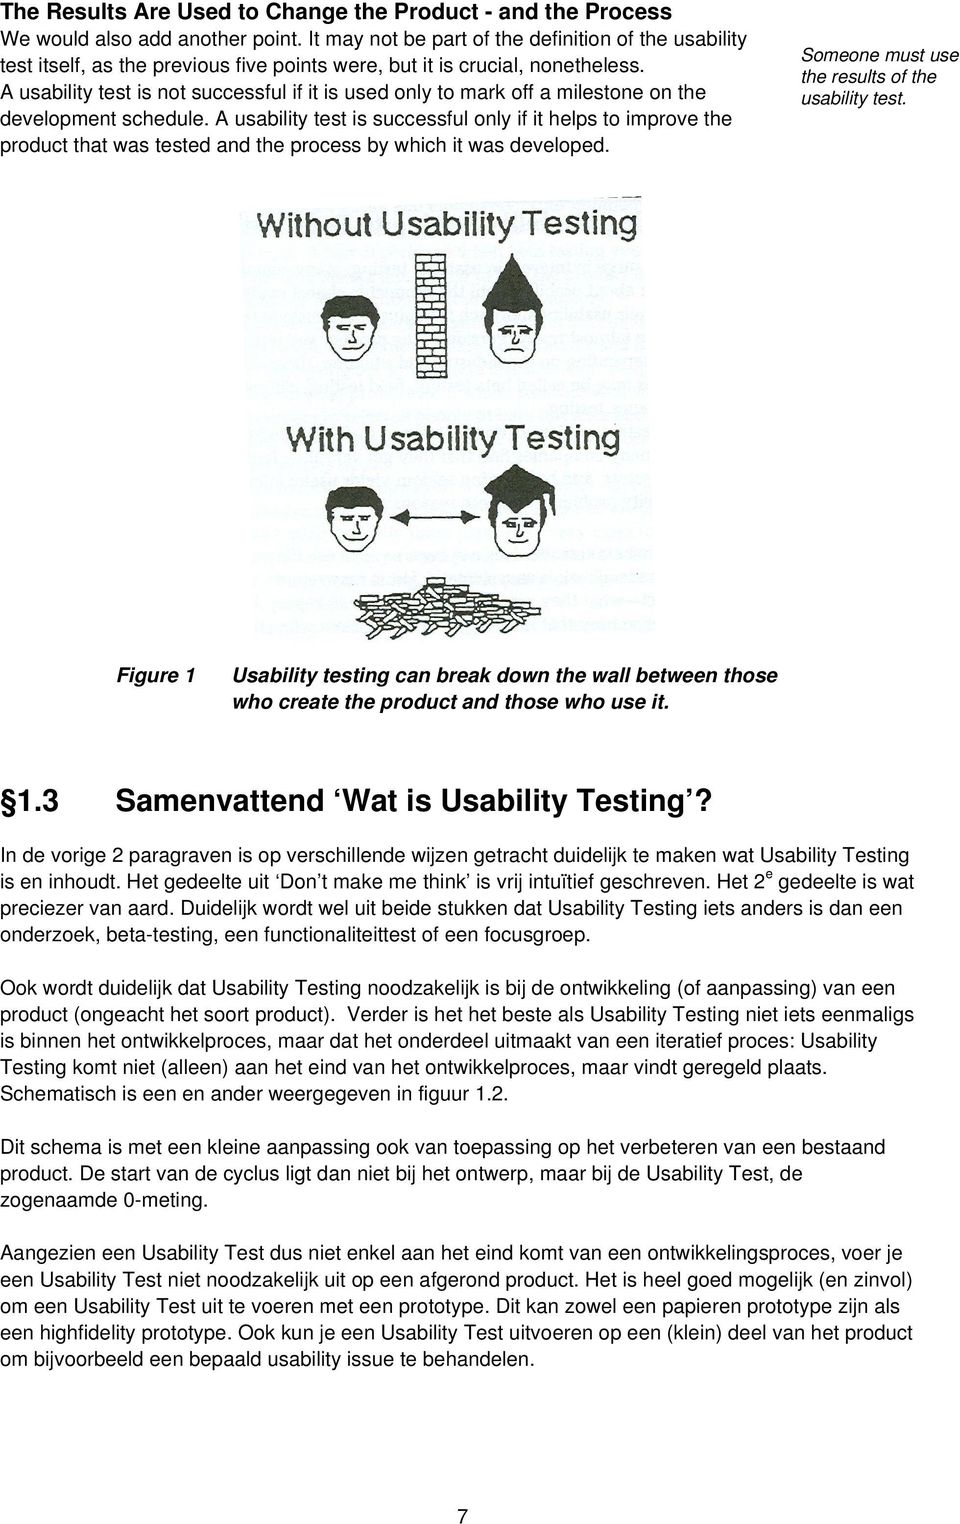 A usability test is not successful if it is used only to mark off a milestone on the development schedule.